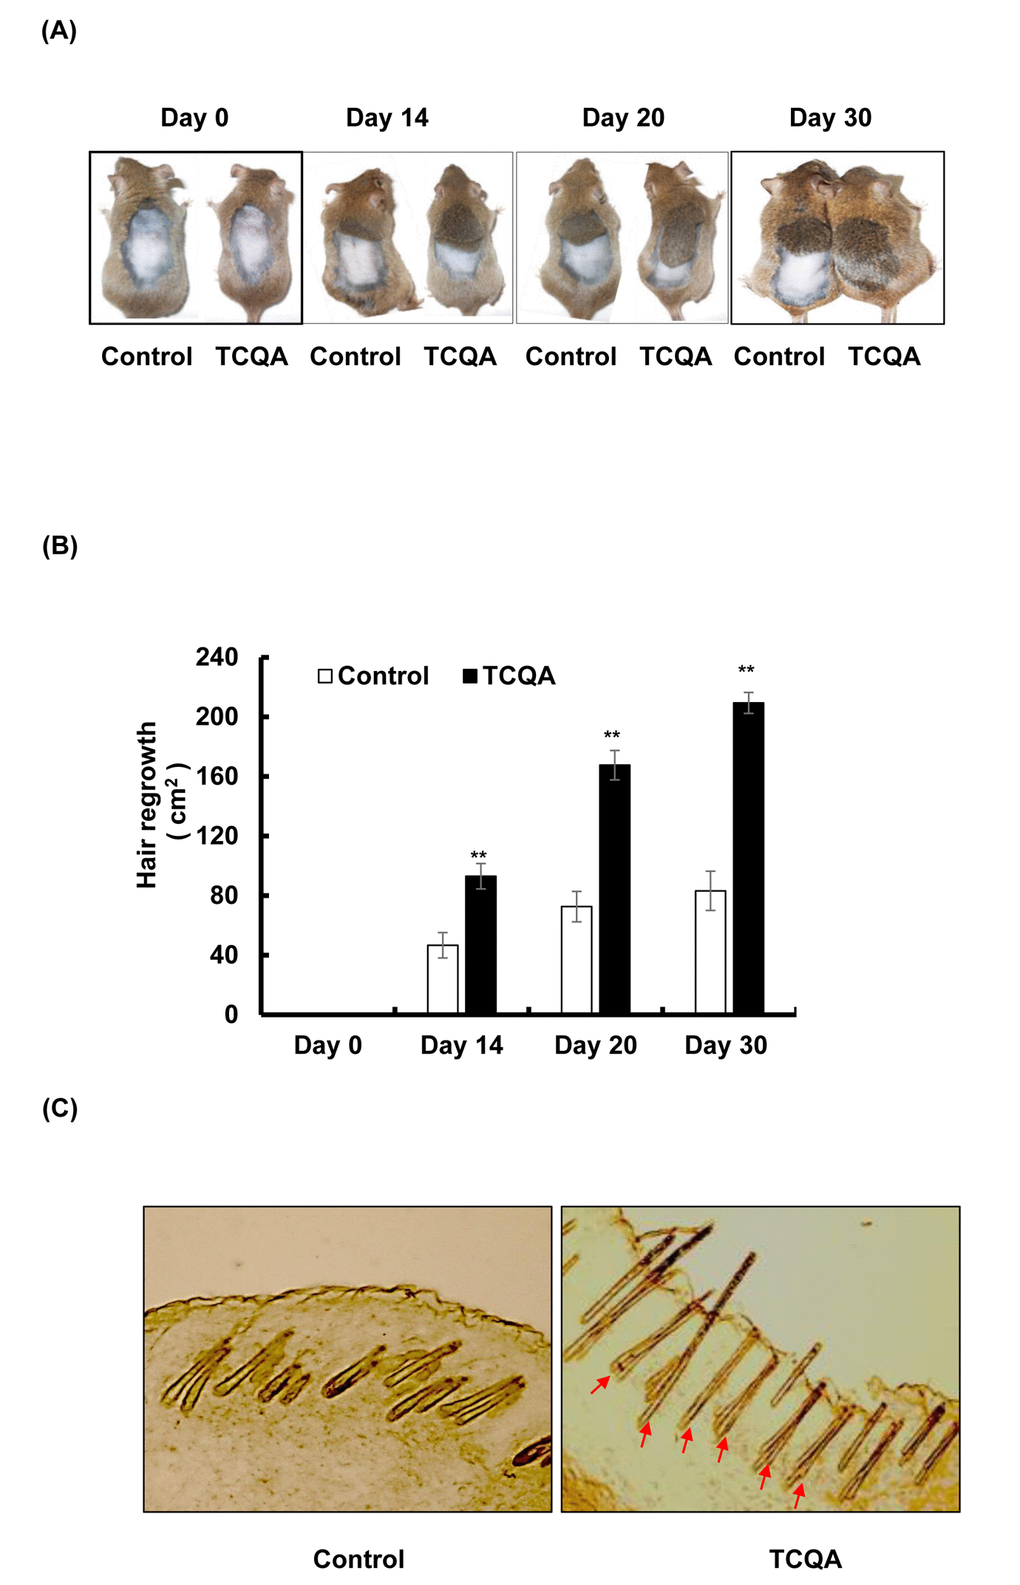 TCQA promoted hair regrowth in C3H mice skin. (A) The back skin of eight-weeks-old male C3H mice was shaved and treated daily with topical application of 1 wt% TCQA (1 g TCQA in 100 ml milli-Q water) and with milli-Q water (control) for 30 days. (B) The area of the new generated coat was measured by ImageJ. (C) Skin from treated area from TCQA-treated group and control group were cut at thickness of 10 µM and visualized under the microscope. *Statistically significant (P ≤0.05) difference between control and TCQA-treated group. **Statistically significant (P ≤0.01) difference between control and TCQA-treated mice.